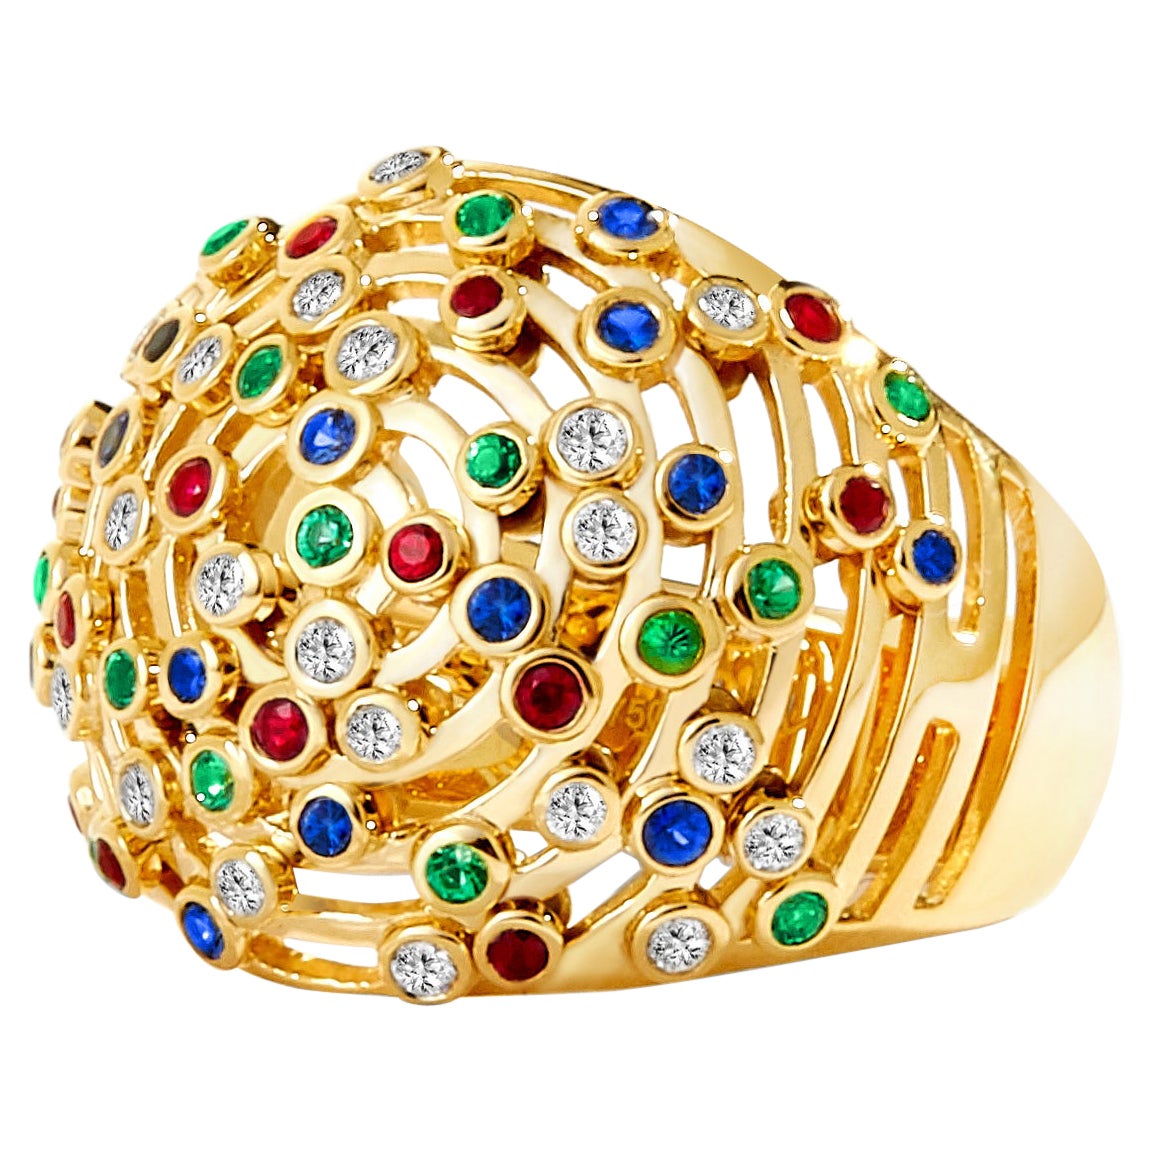 Syna Yellow Gold Cosmic Dome Ring with Champagne Diamonds